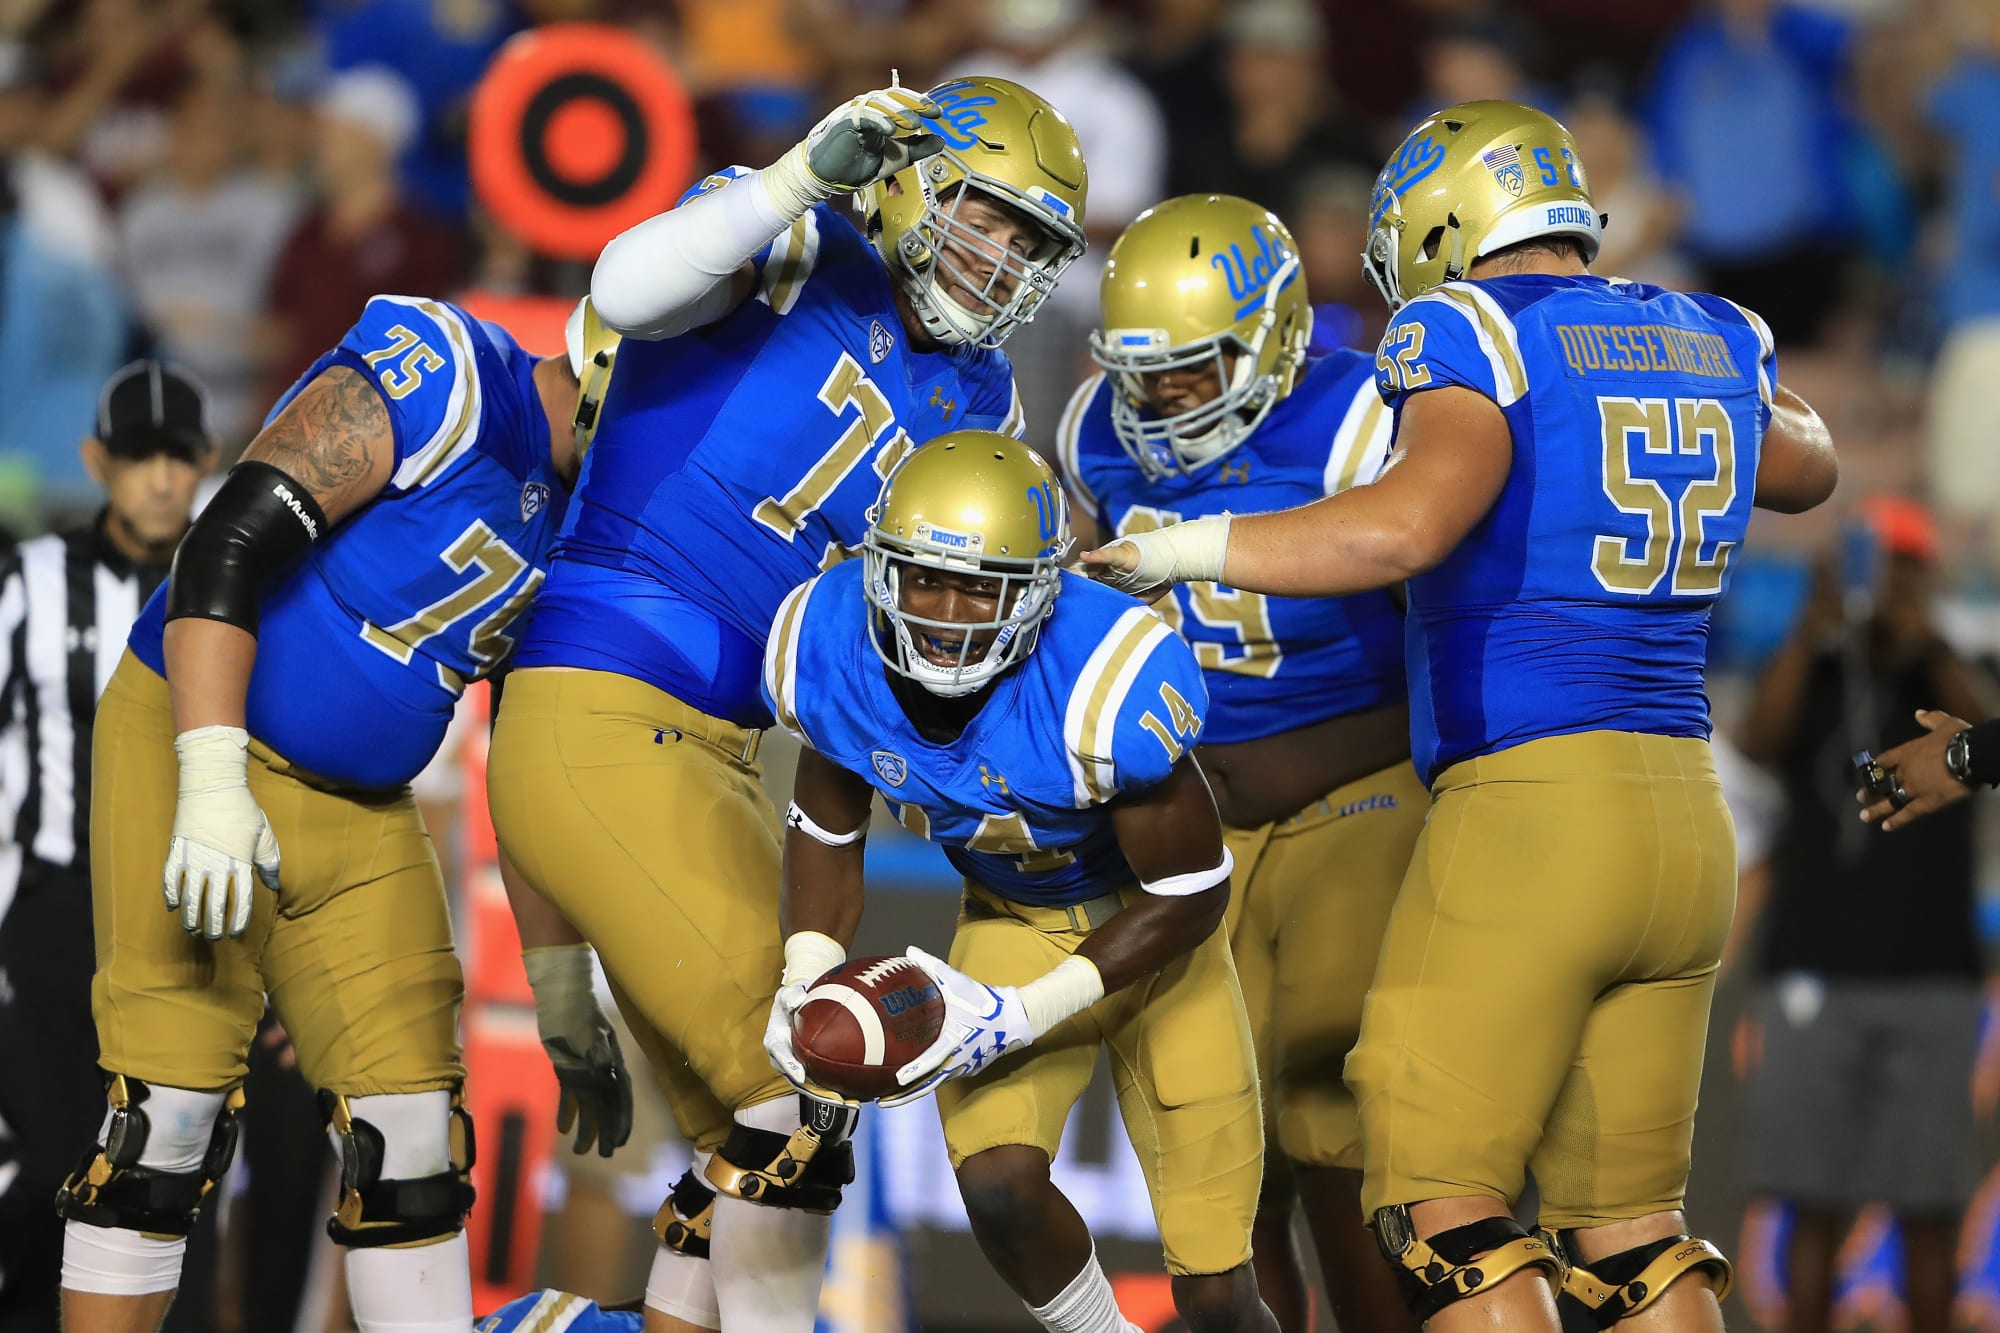 UCLA FootballGrading the offensive line against the Aggies